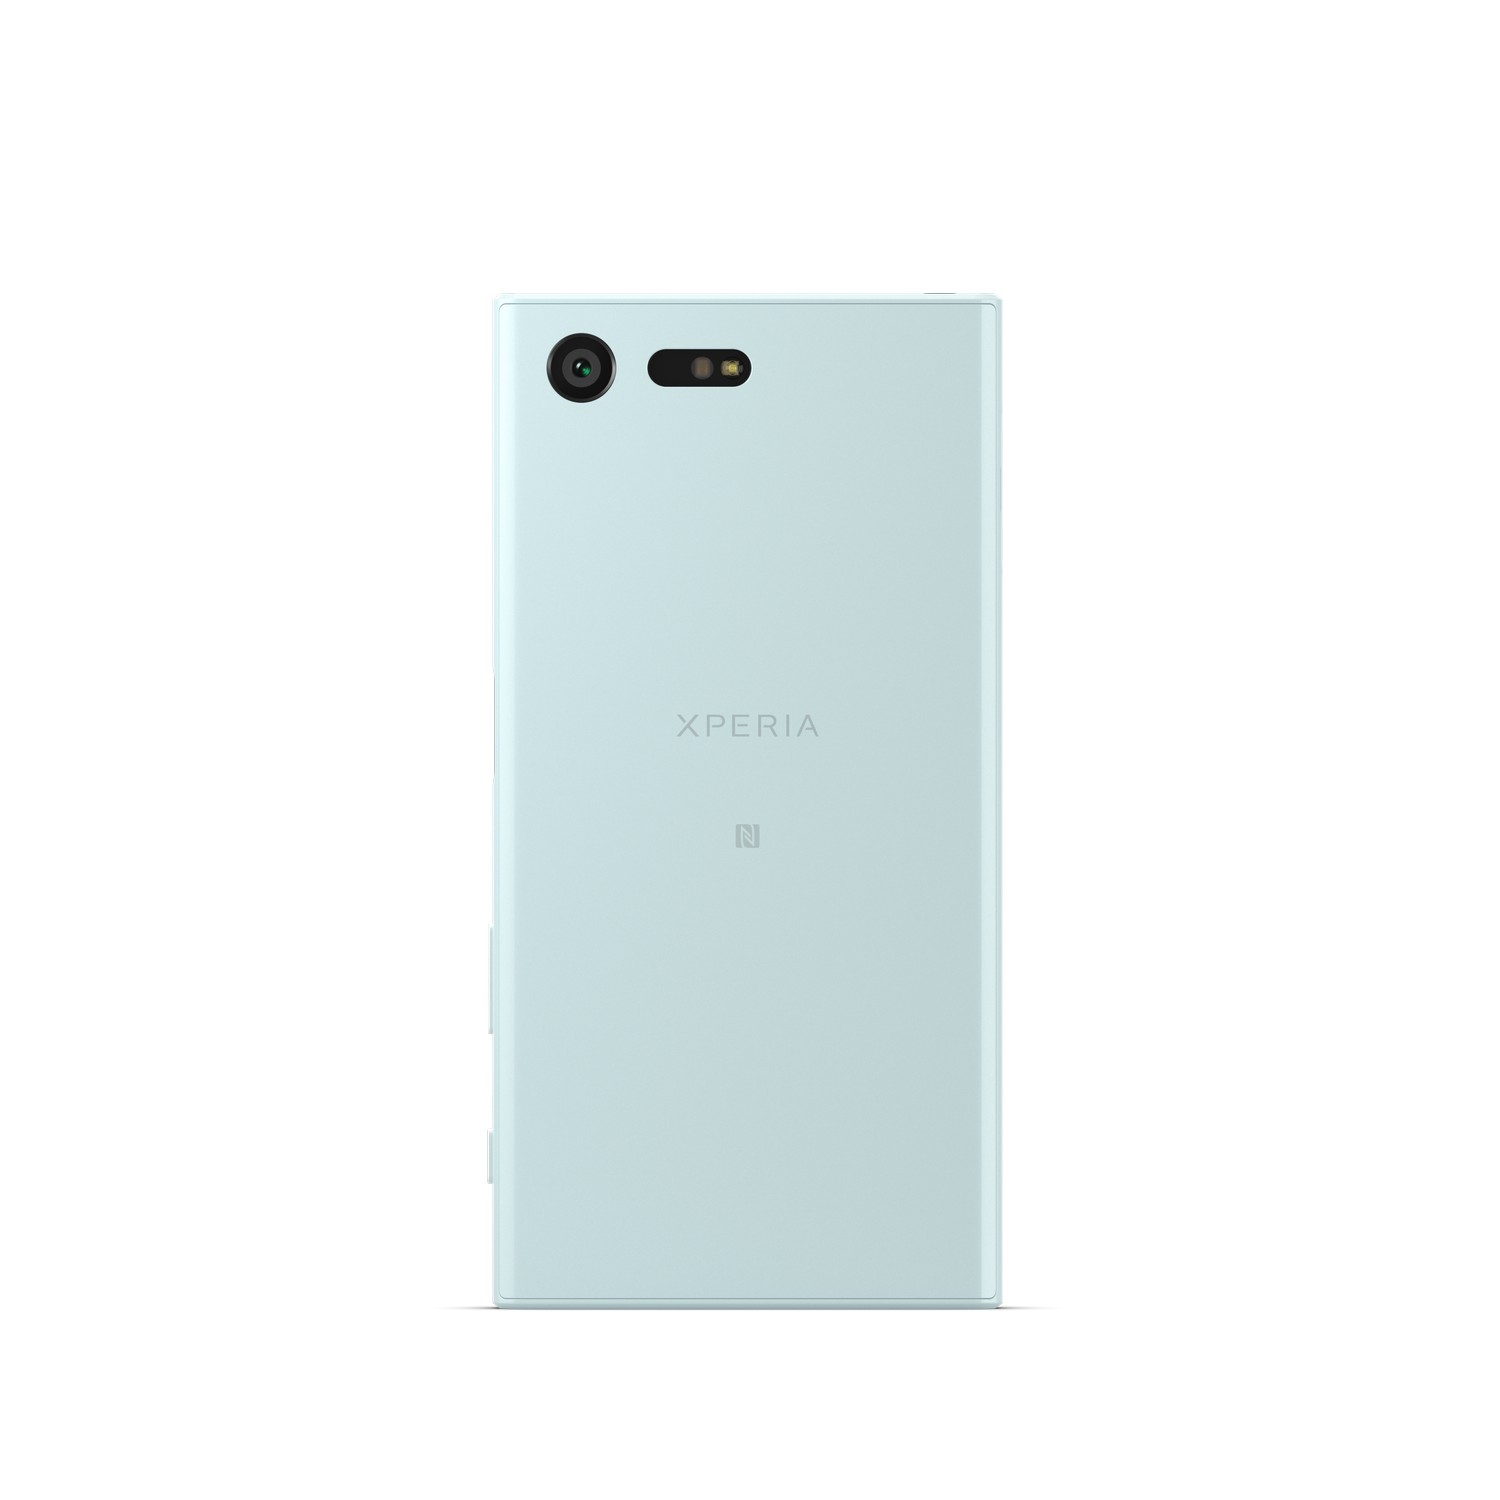 Sony-Xperia-X-Compact (2)